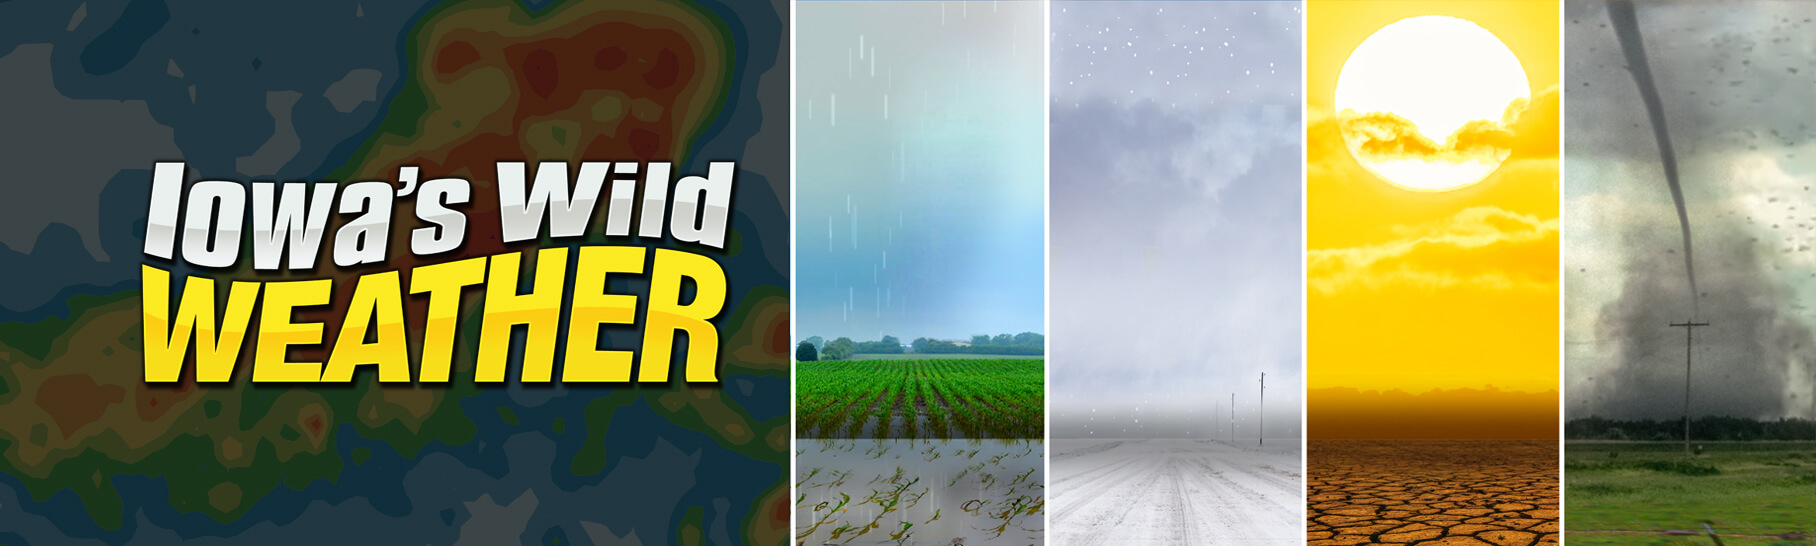 Drought, tornado, flood and severe weather imagery and Iowa's Wild Weather logo